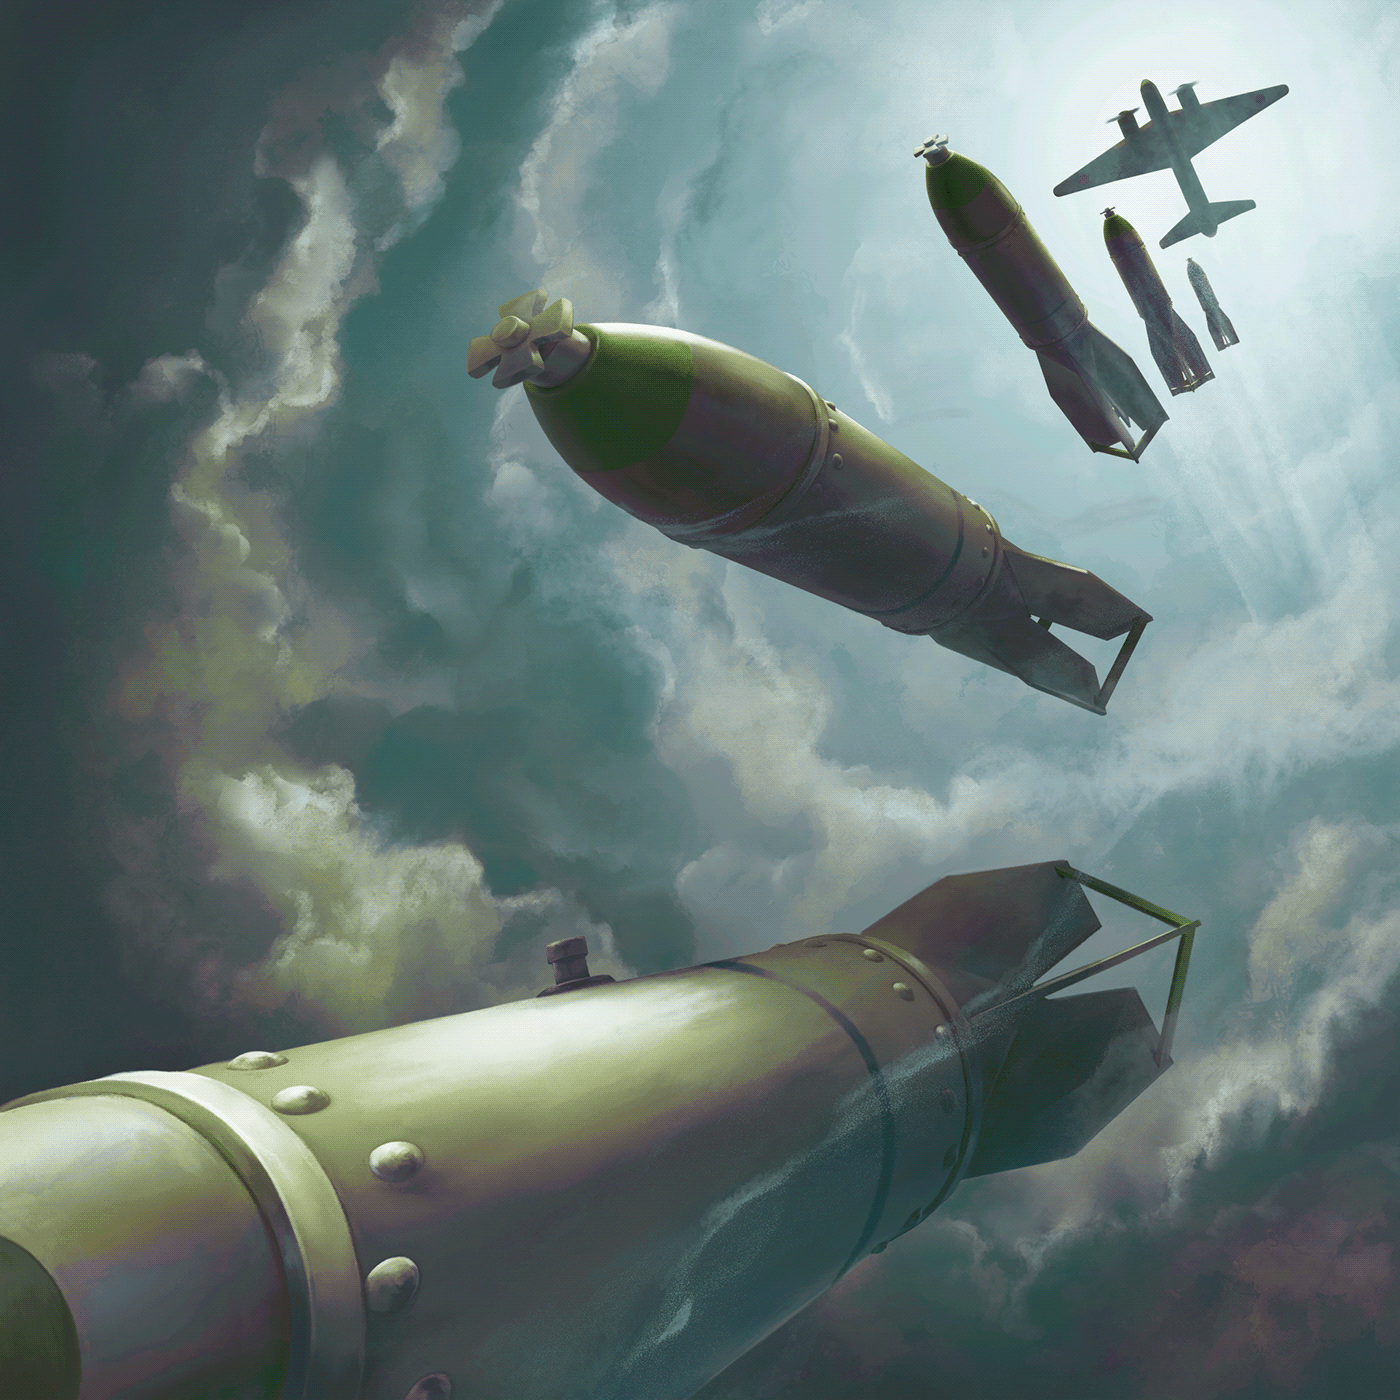 trading cards WWII bomb infantry army board game airplane blenderillustration warillustration ww2